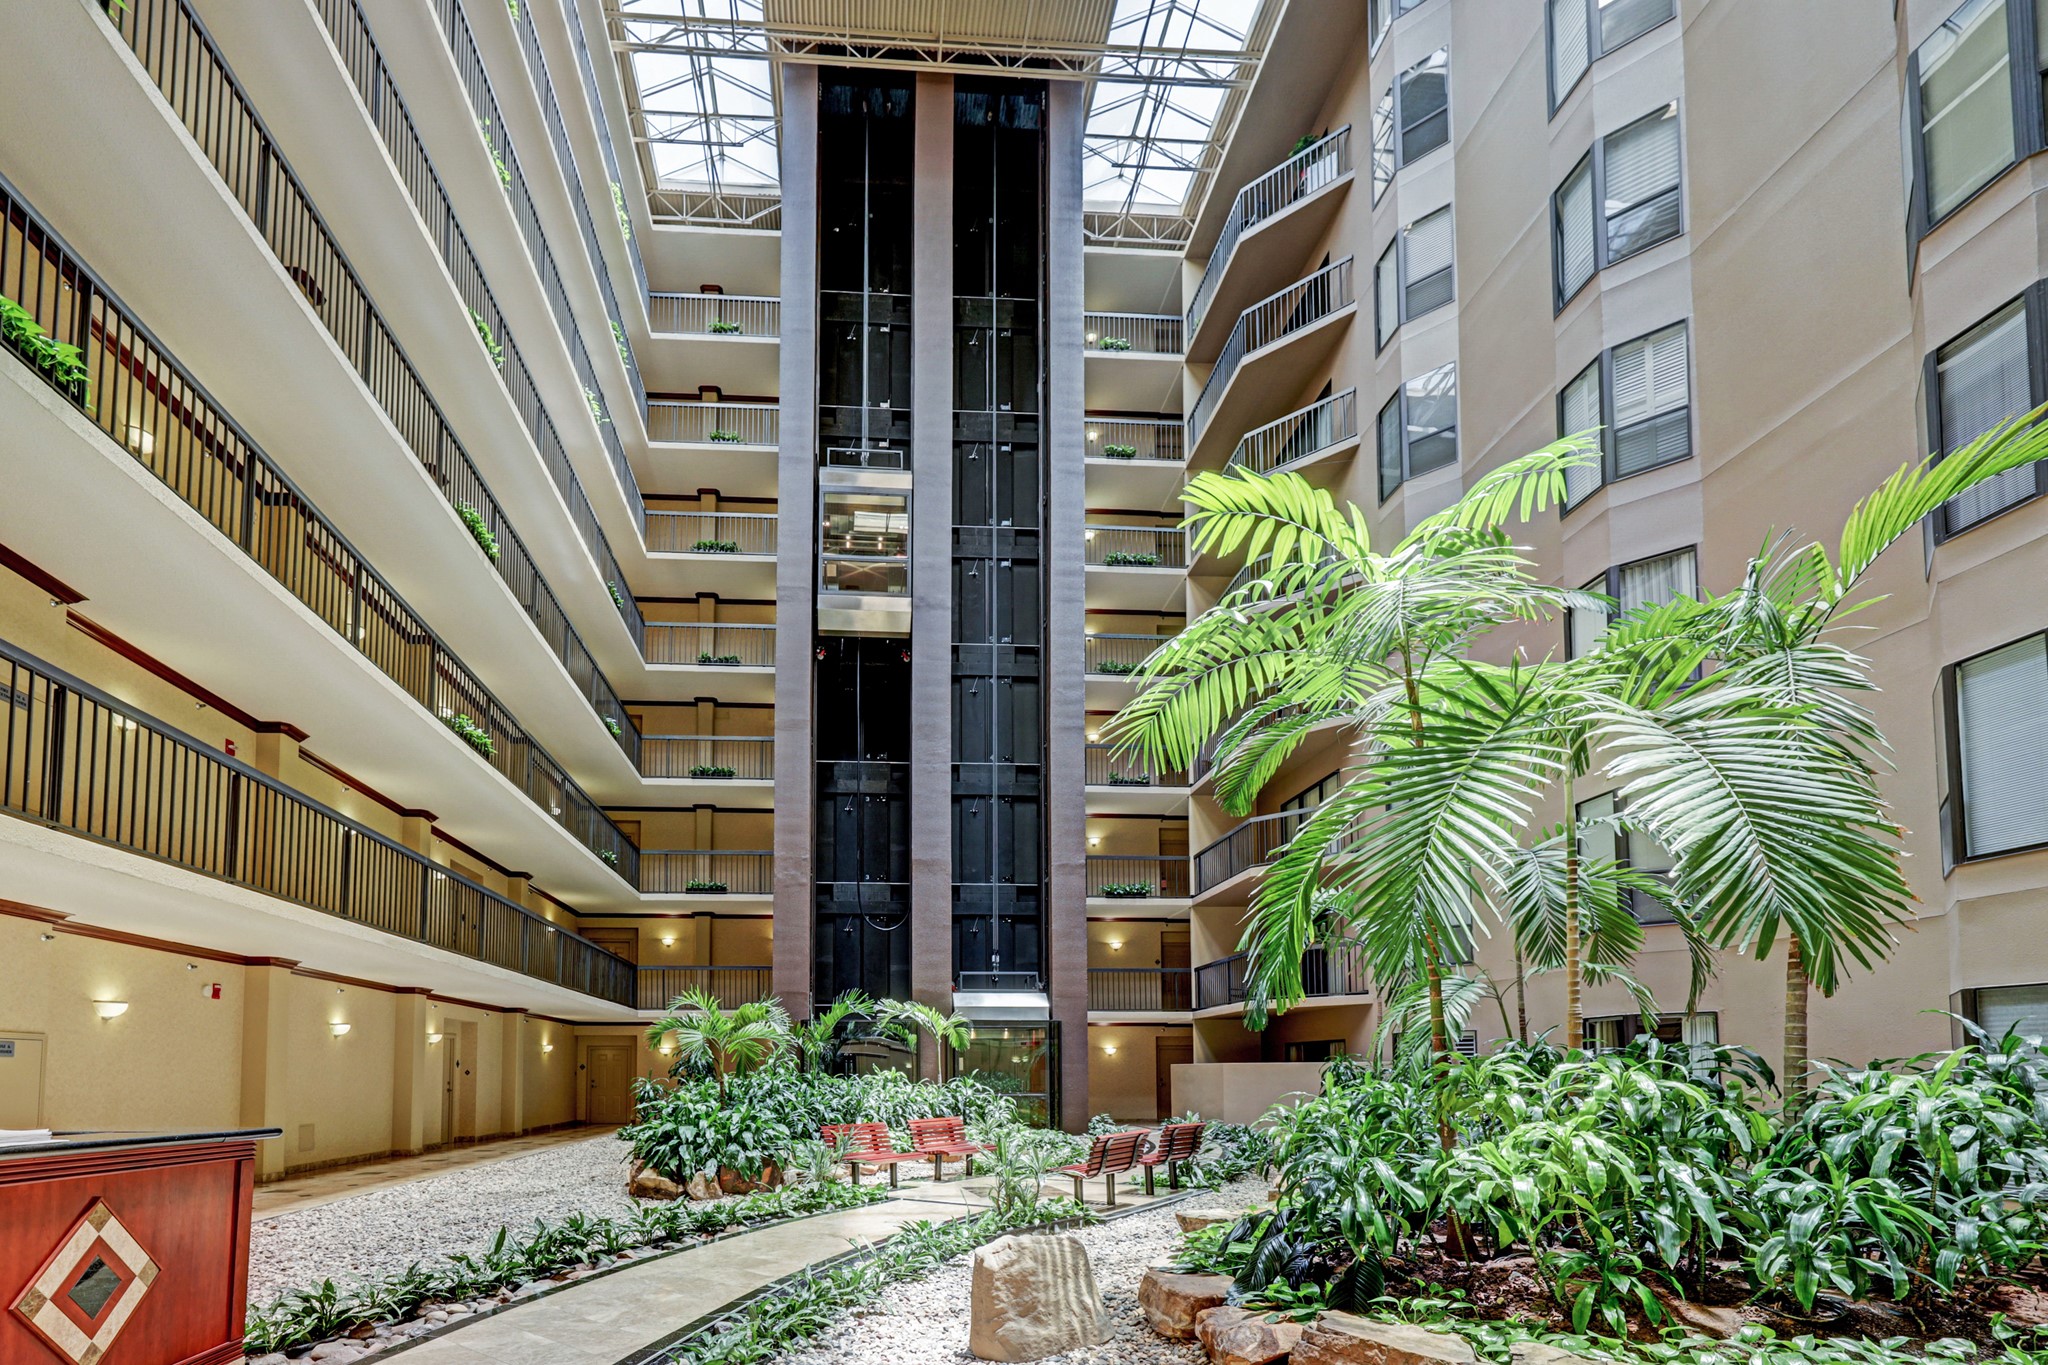 Atrium:  Filled with Alexander palms & tropical landscaping.